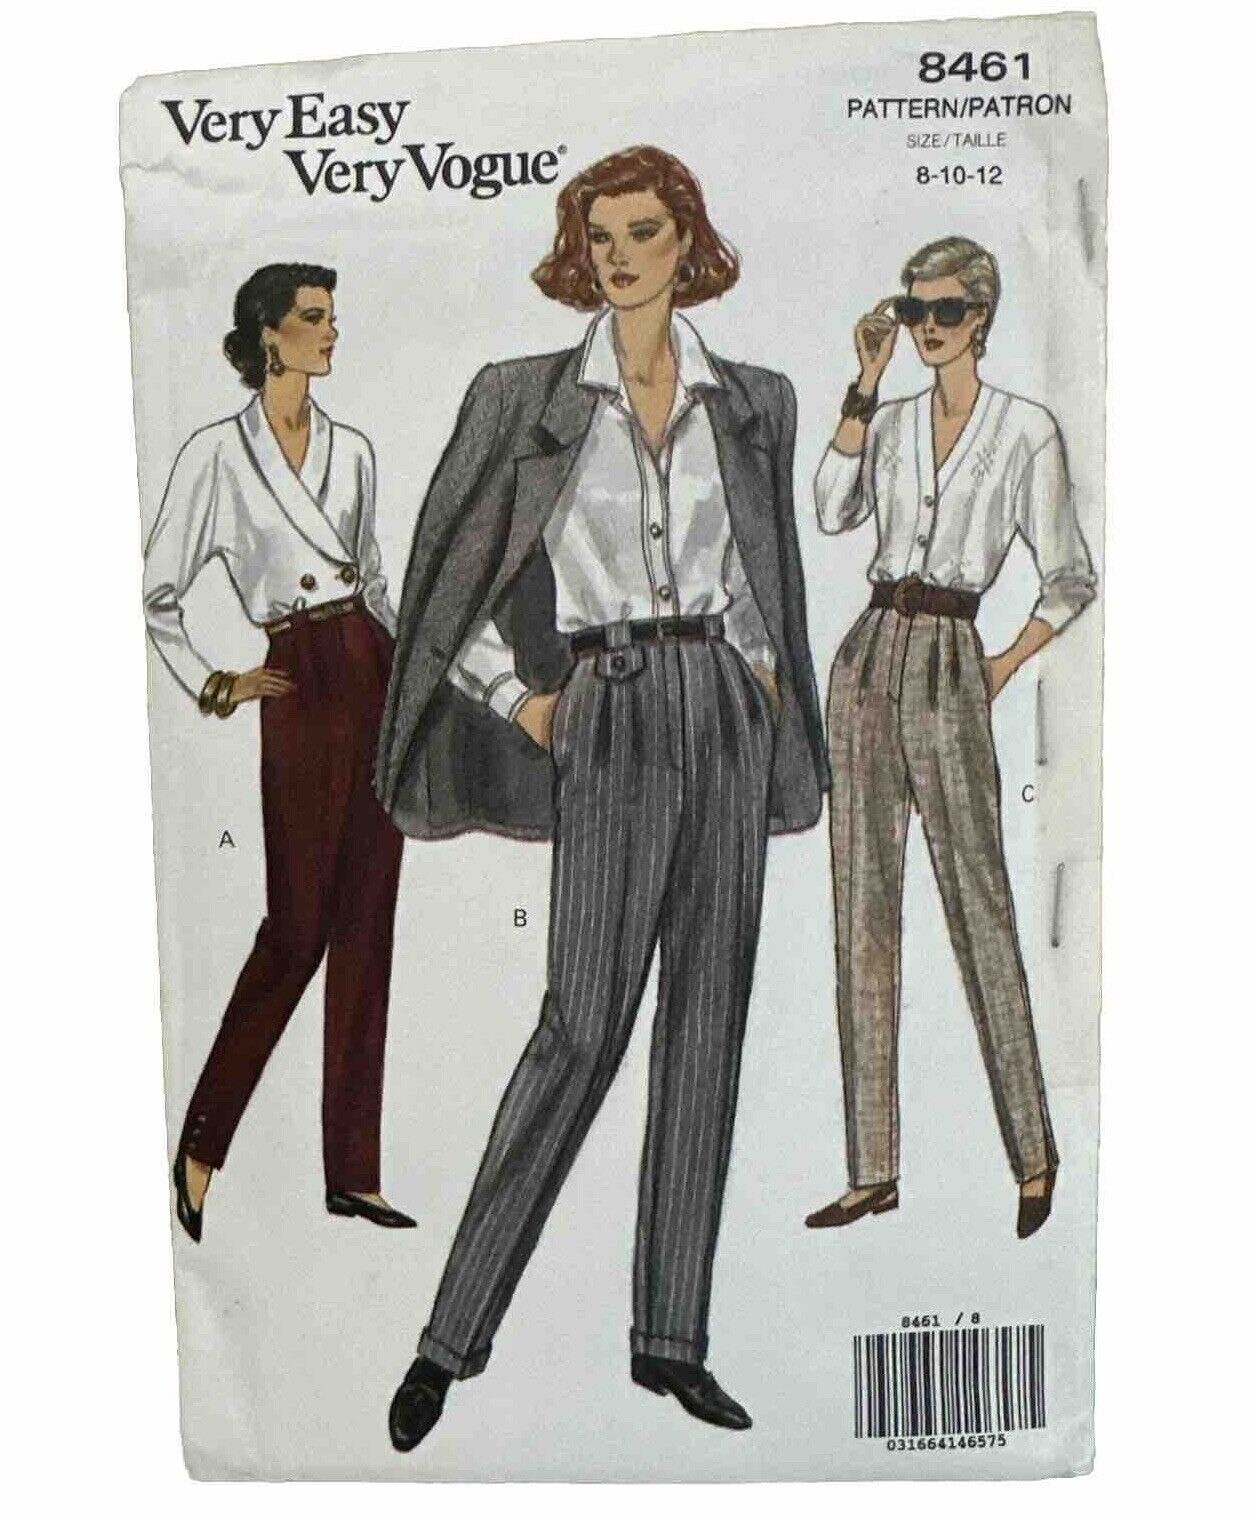 Very Easy Very Vogue 8461 Sewing Pattern Size Tall 8-12 Pants From 1990s Unused